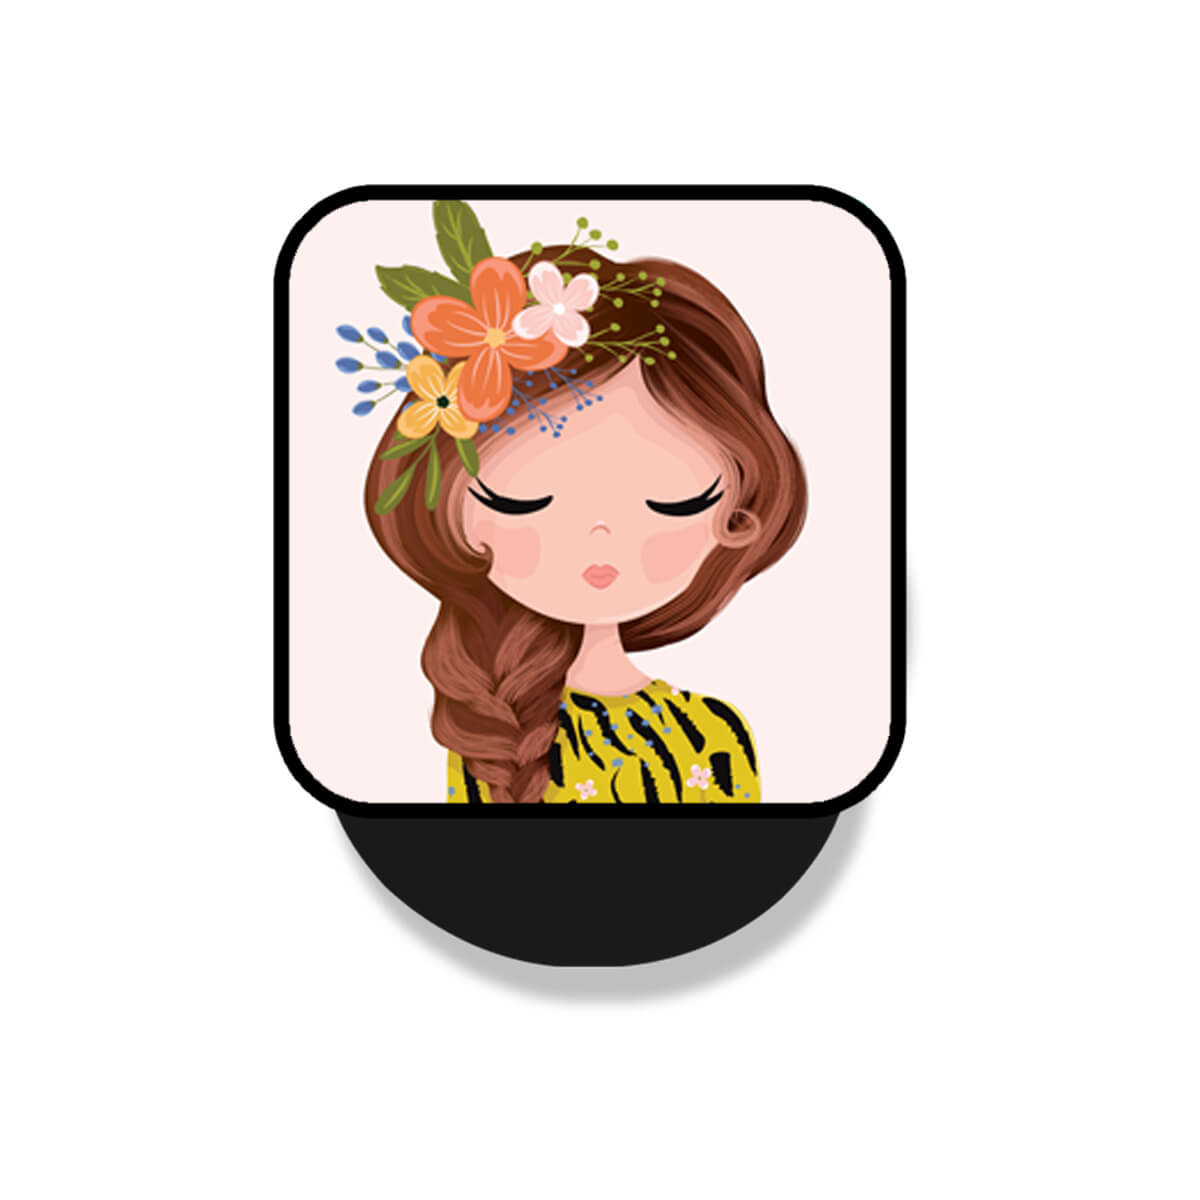 Cute Girl With Braided Hair In Flowers Mobile Phone Grip Holder & Stand | Selfie Holder For Smart Phones